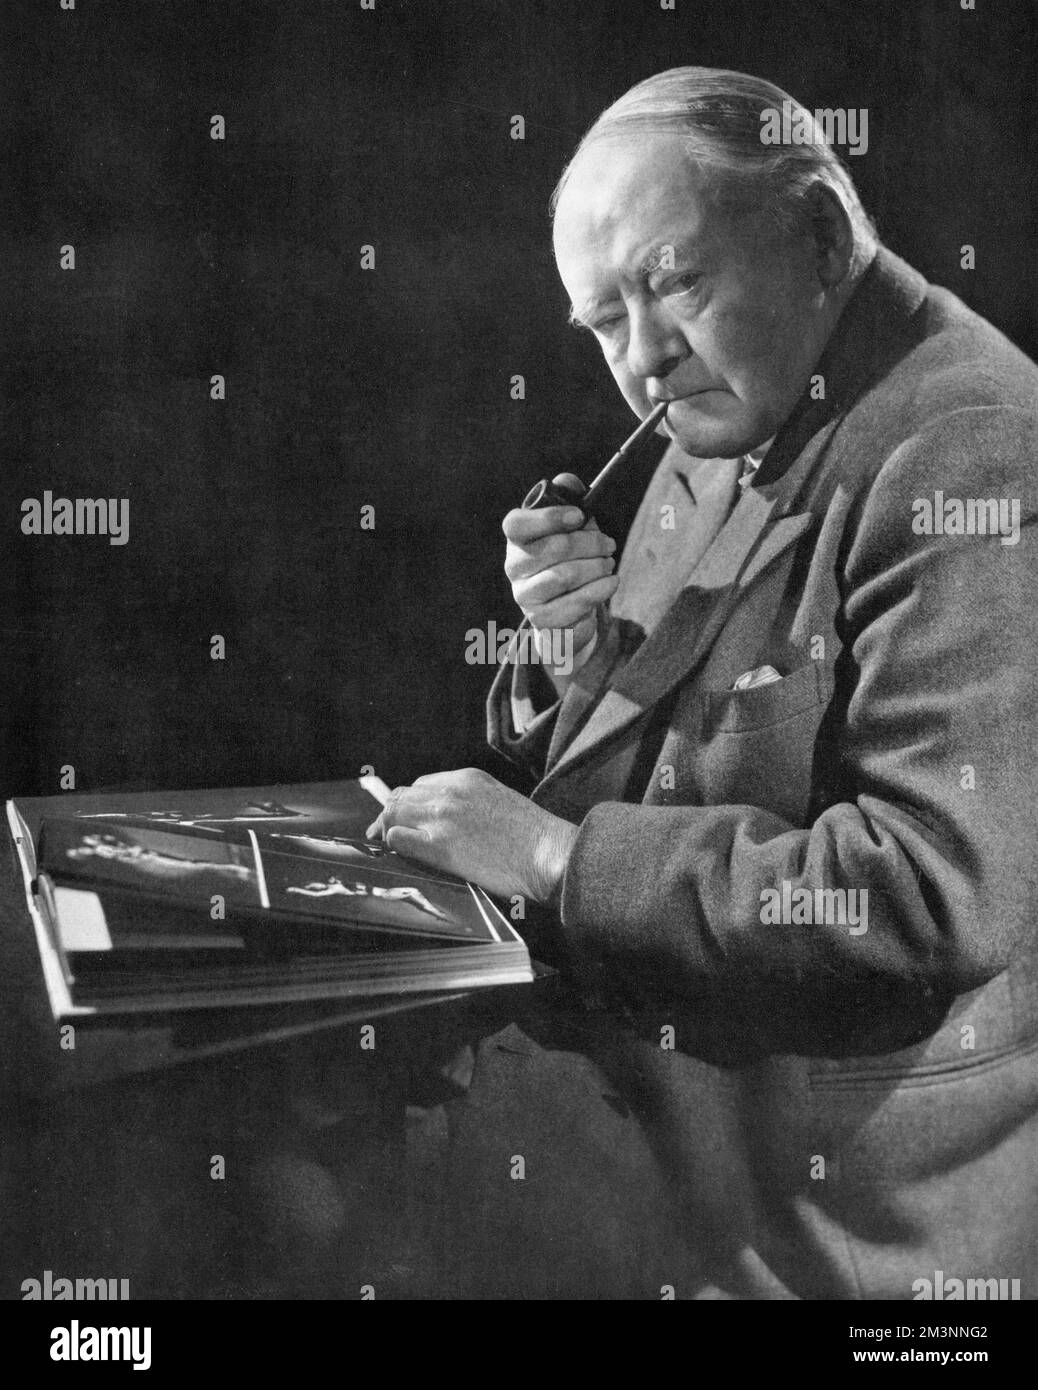 Sir Arnold Bax (1883 - 1953), British composer, who composed a work for mark the Festival of Britain.  His name is particularly associated with a Celtic revival in music.  He wrote 'London Pageant' for the Coronation of George VI in 1937 and was knighted in the same year.       Date: 1951 Stock Photo